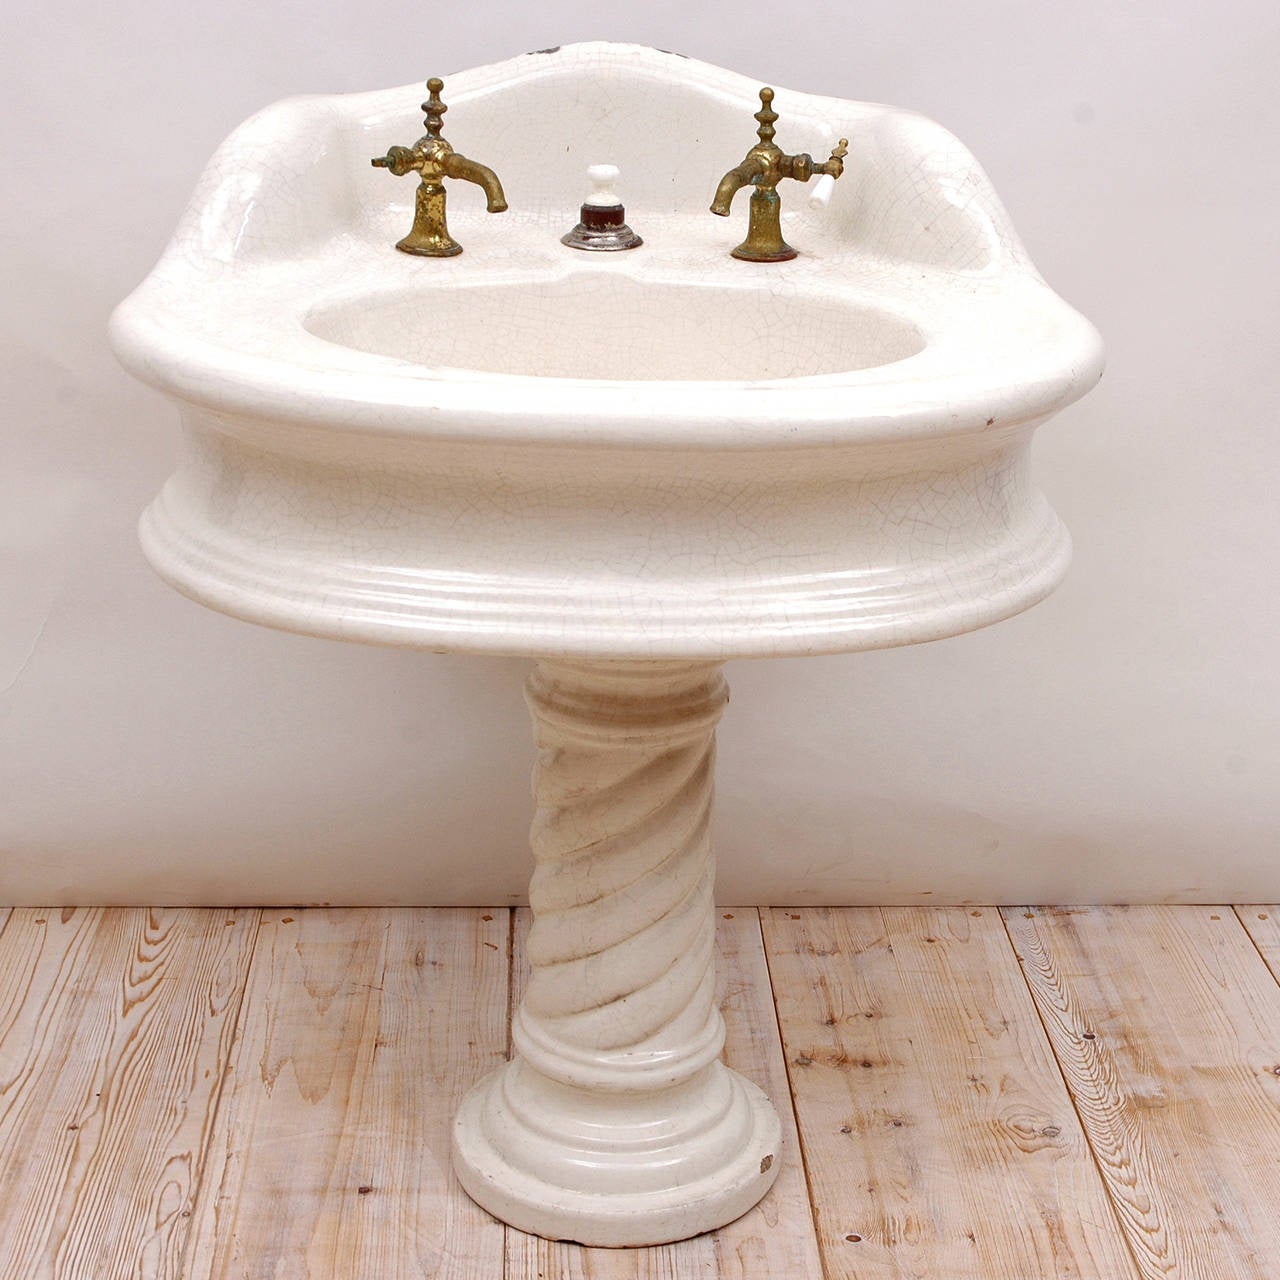 A beautiful & very sculptural Victorian pedestal sink in cast earthenware with white porcelain glaze, circa 1880. Includes old brass faucets & stopper. Porcelain sink is crazed but not structurally compromised. There are some chips on the pedestal.